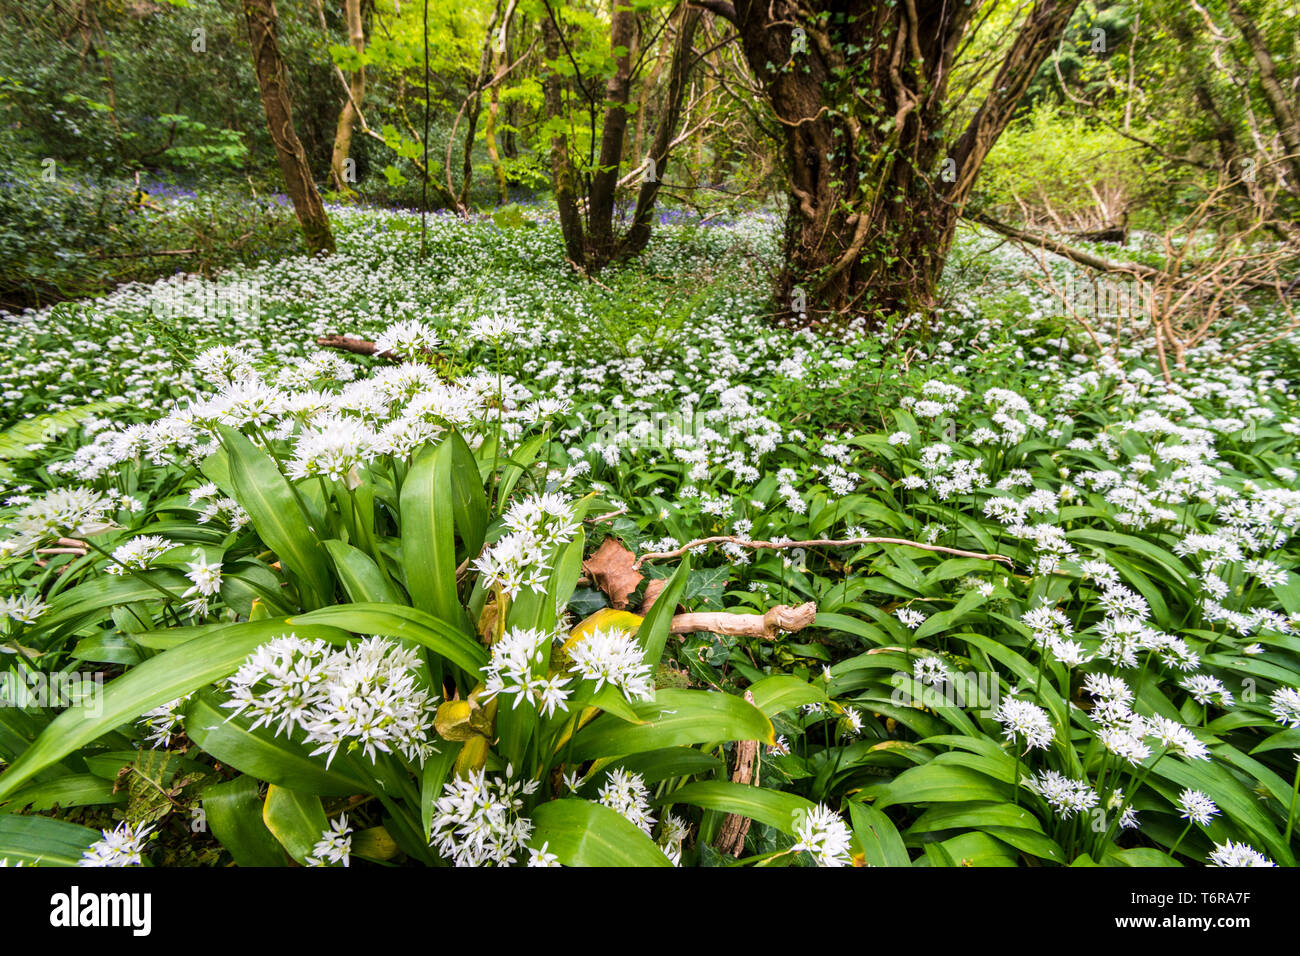 Flowering Allium ursinum, wild garlic, ramsons. It is a wild relative of onion, native to Europe and Asia, where it grows in moist woodland. Stock Photo